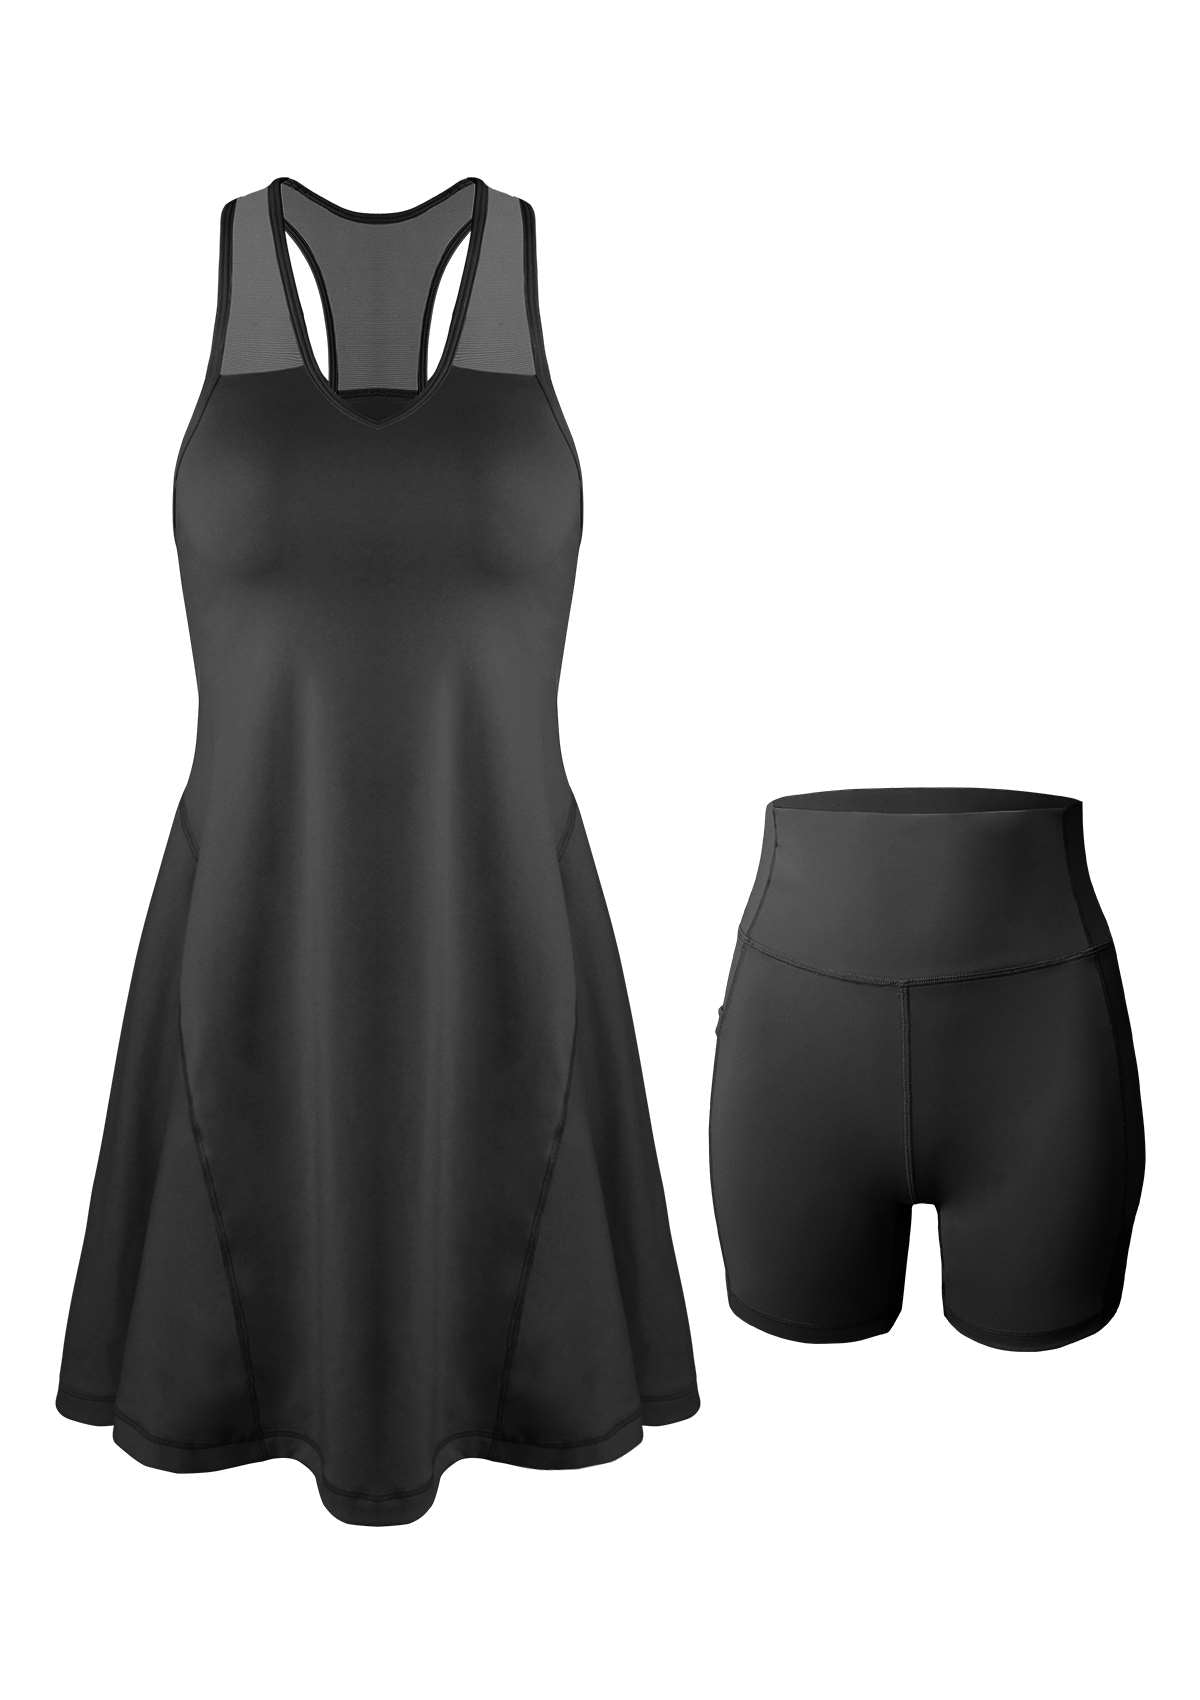 SONGFUL On The Move Sports Dress With Shorts Set - XL / Black